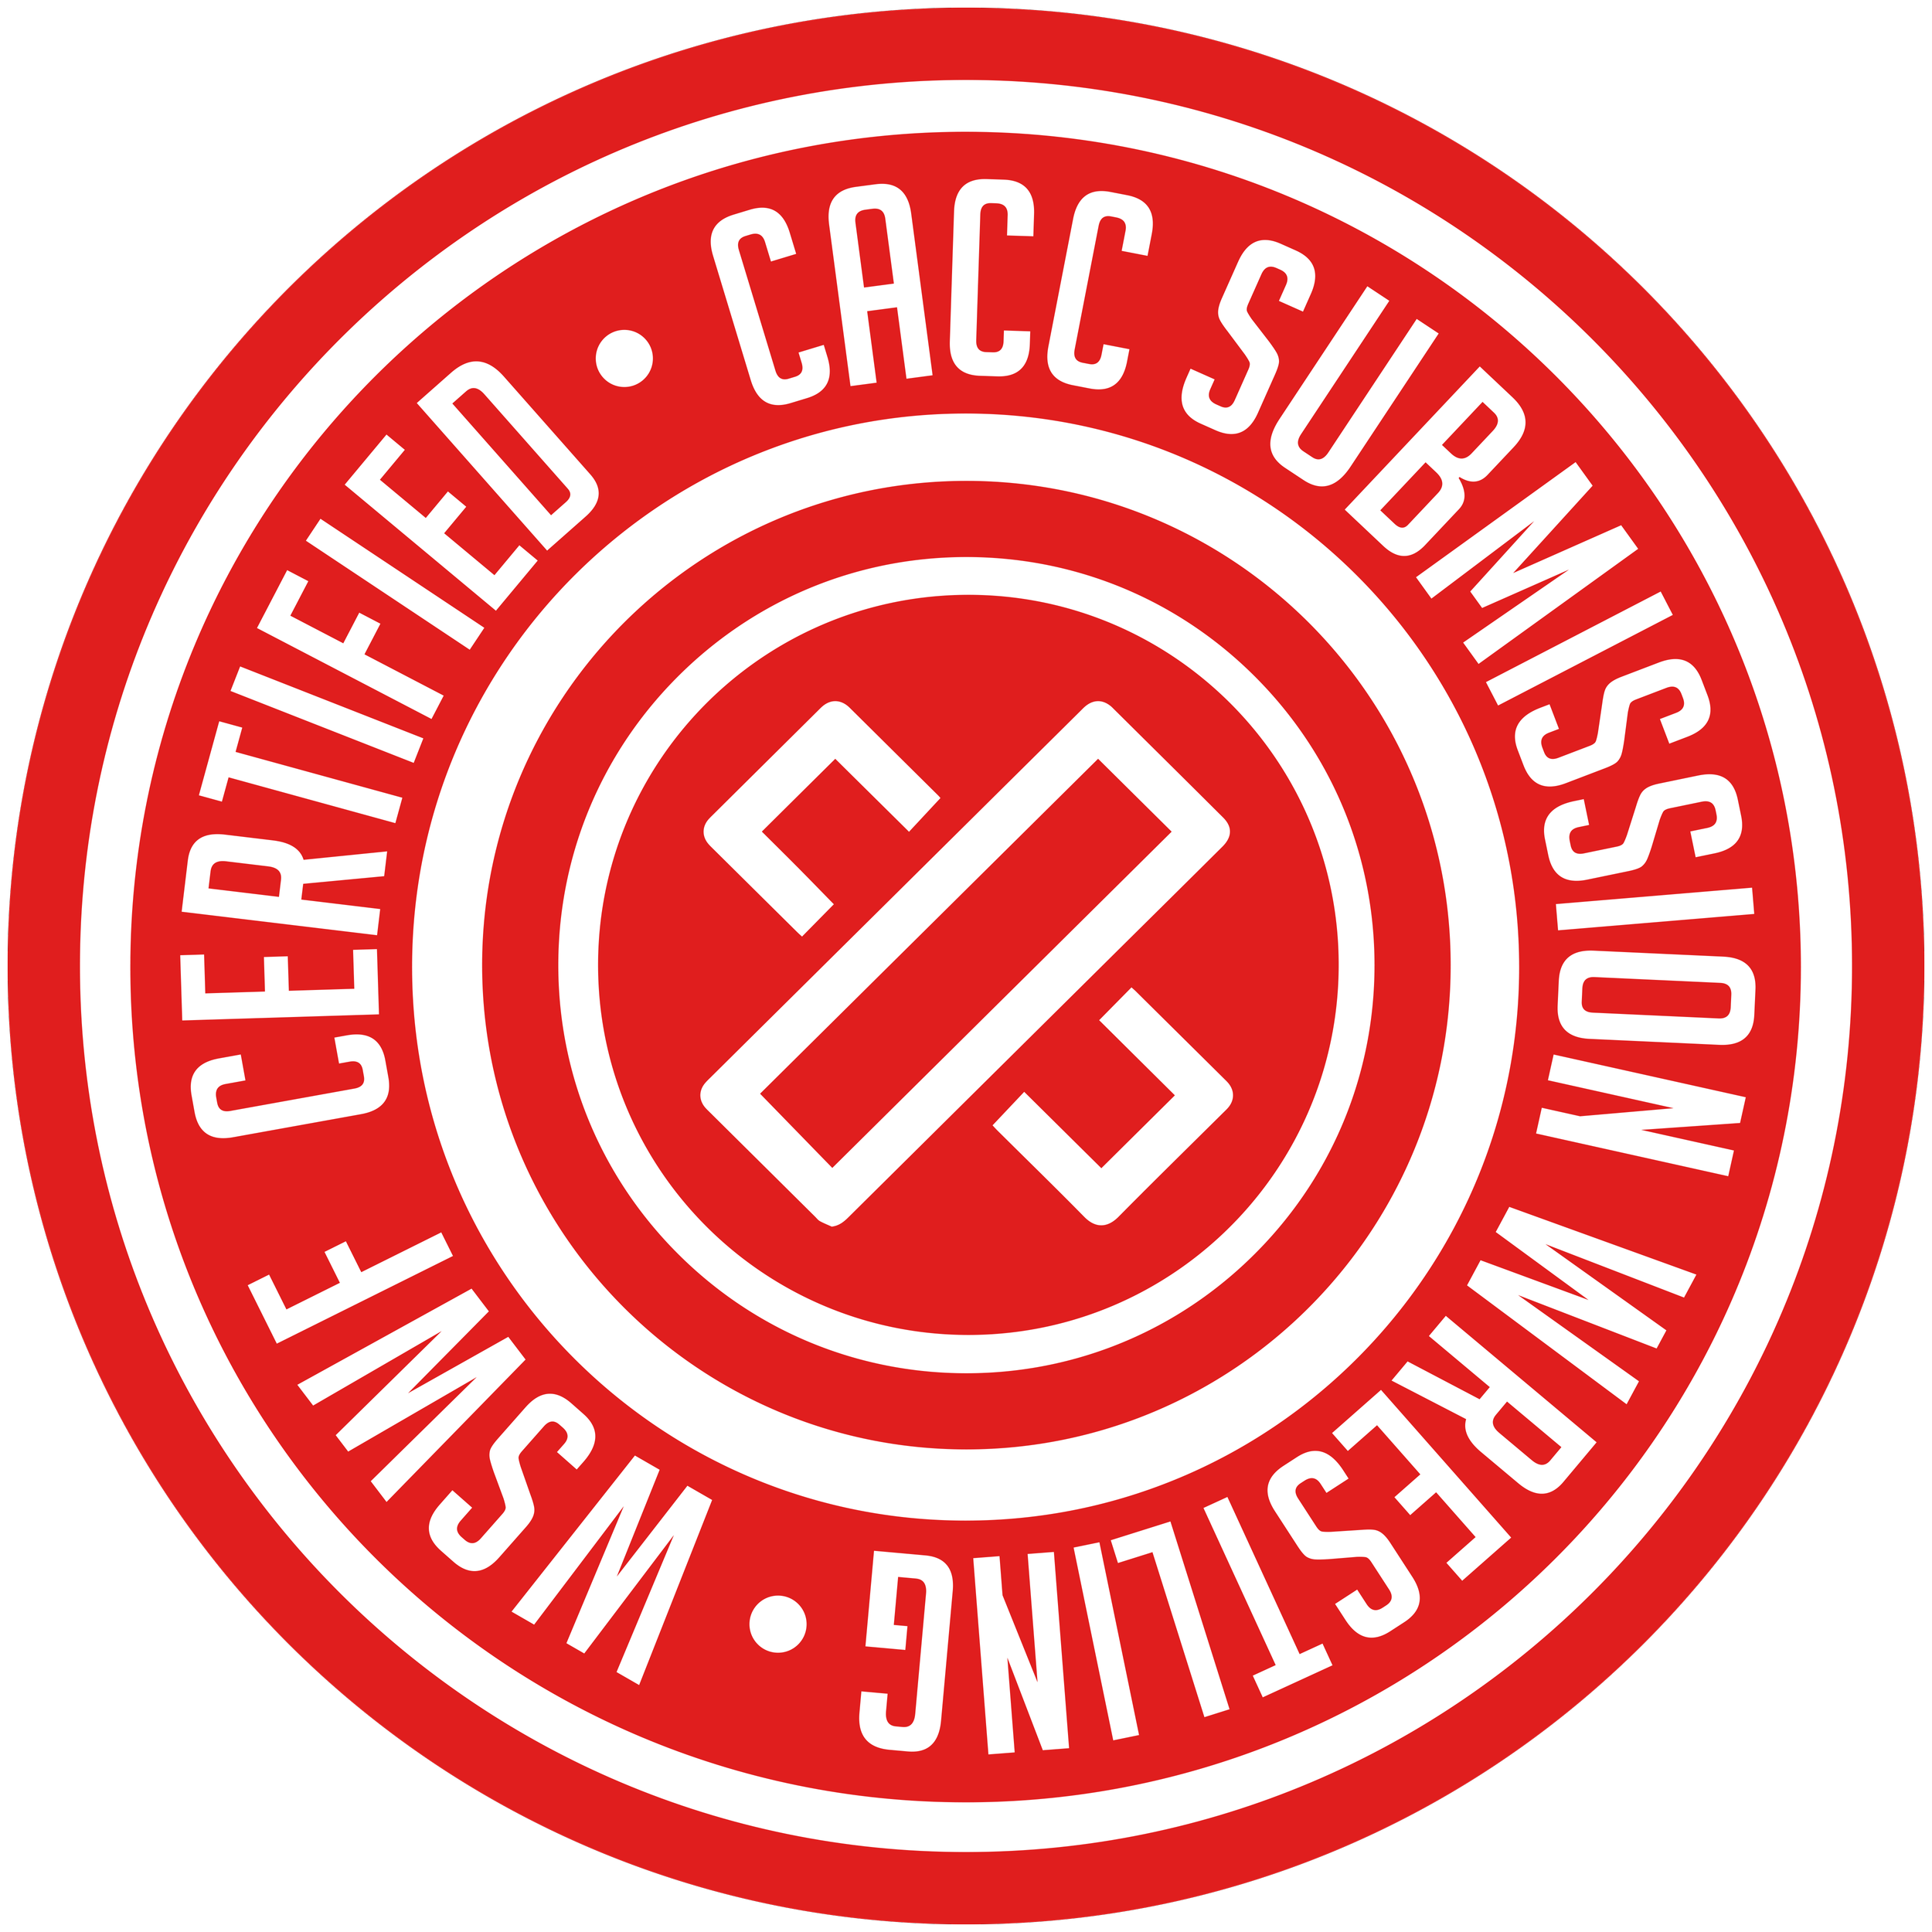 CACC-Certified4.png